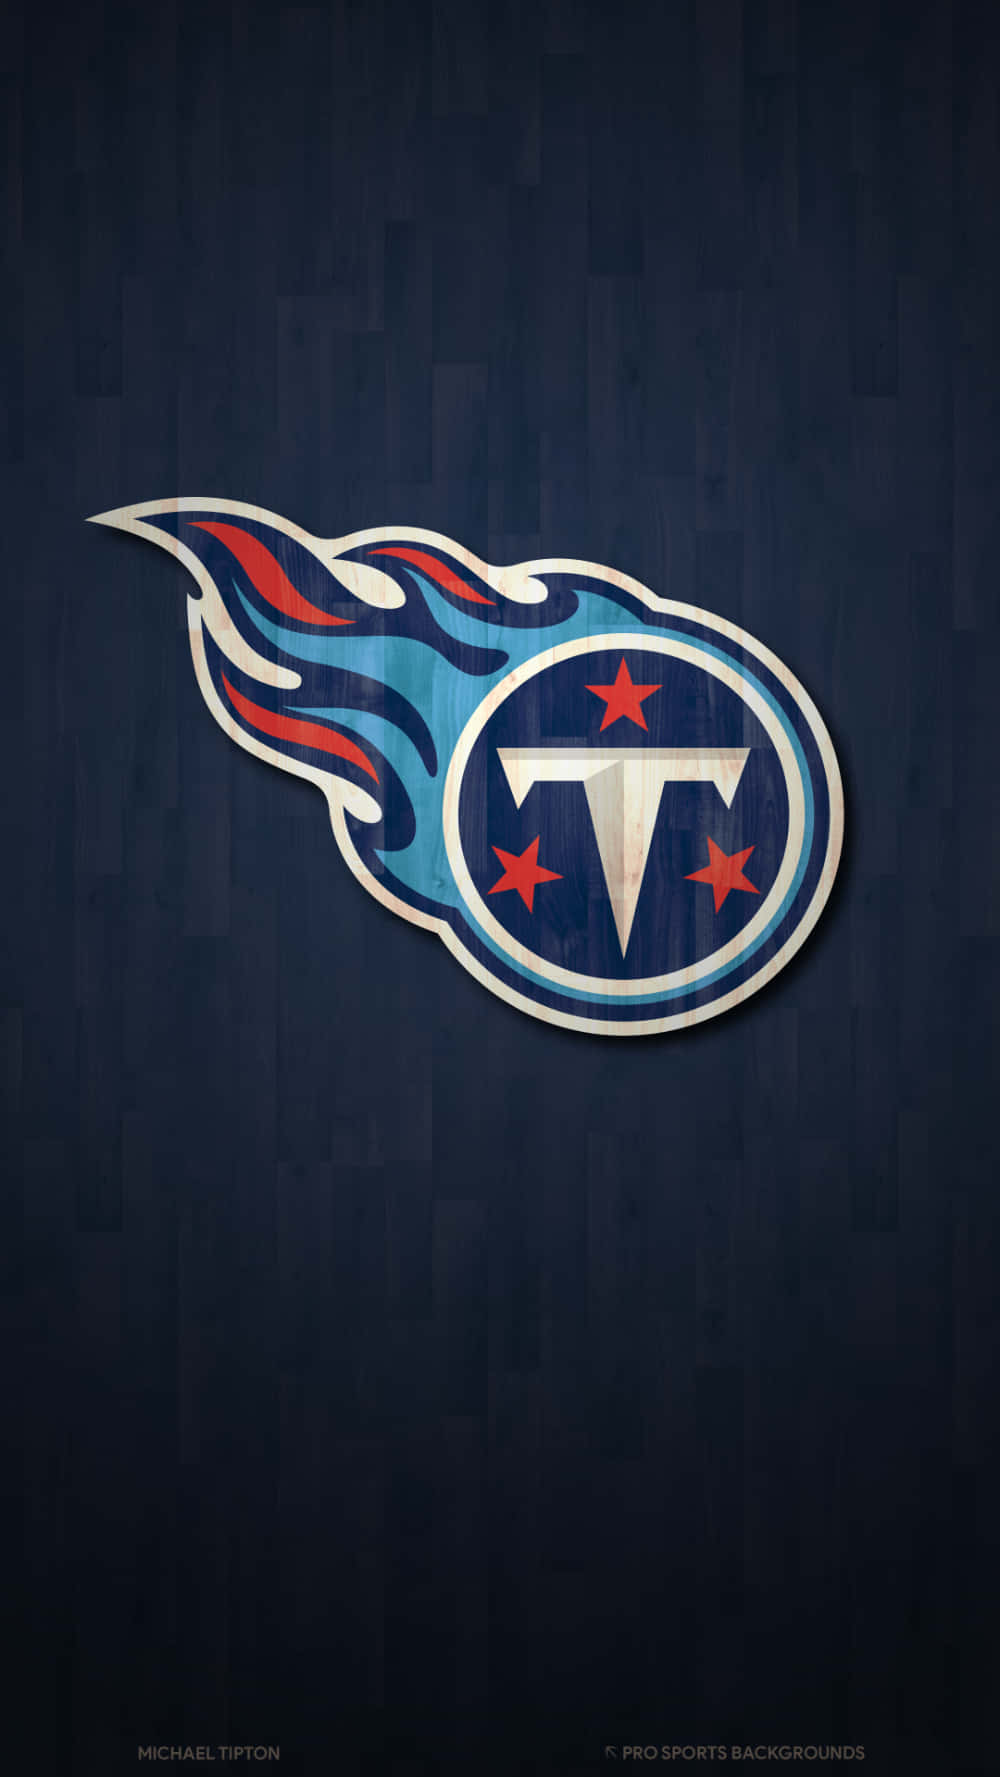 Fan of Tennessee Titans? Show your support with the latest Tennessee Titan’s iPhone Wallpaper